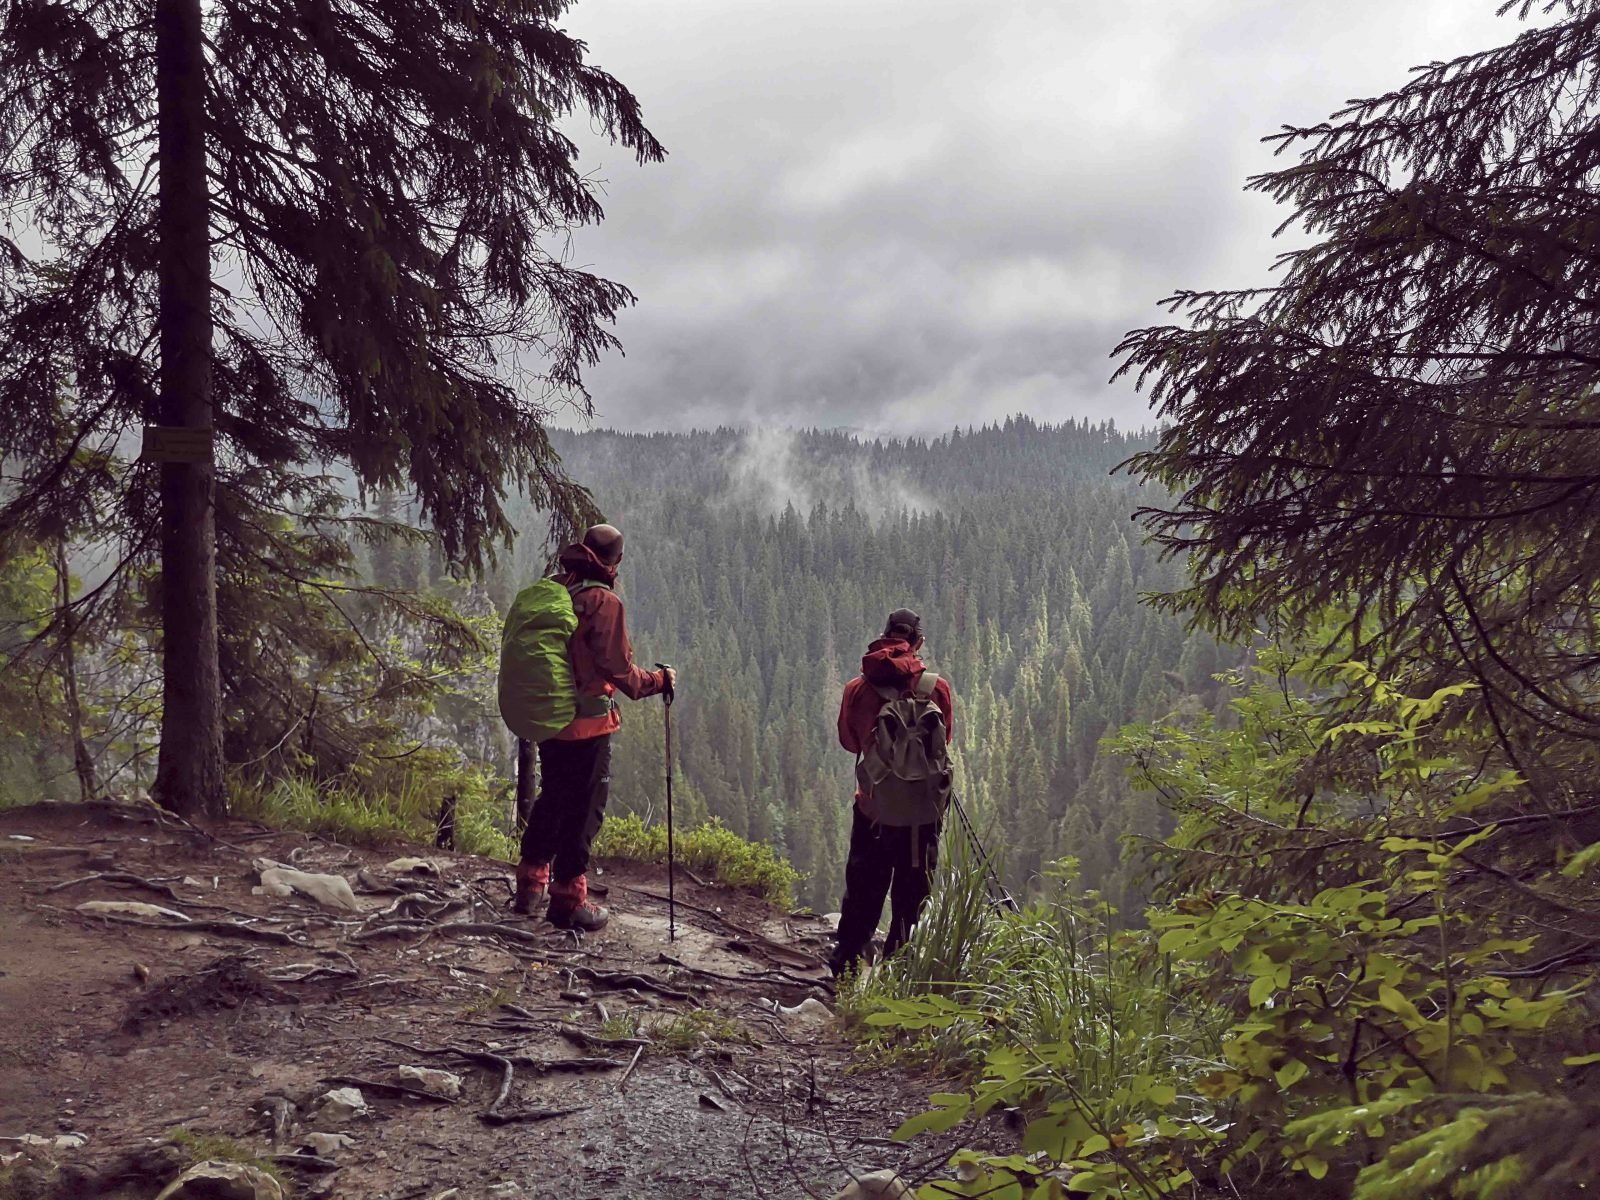 Two hikers looking out onto a view of a pine forest.